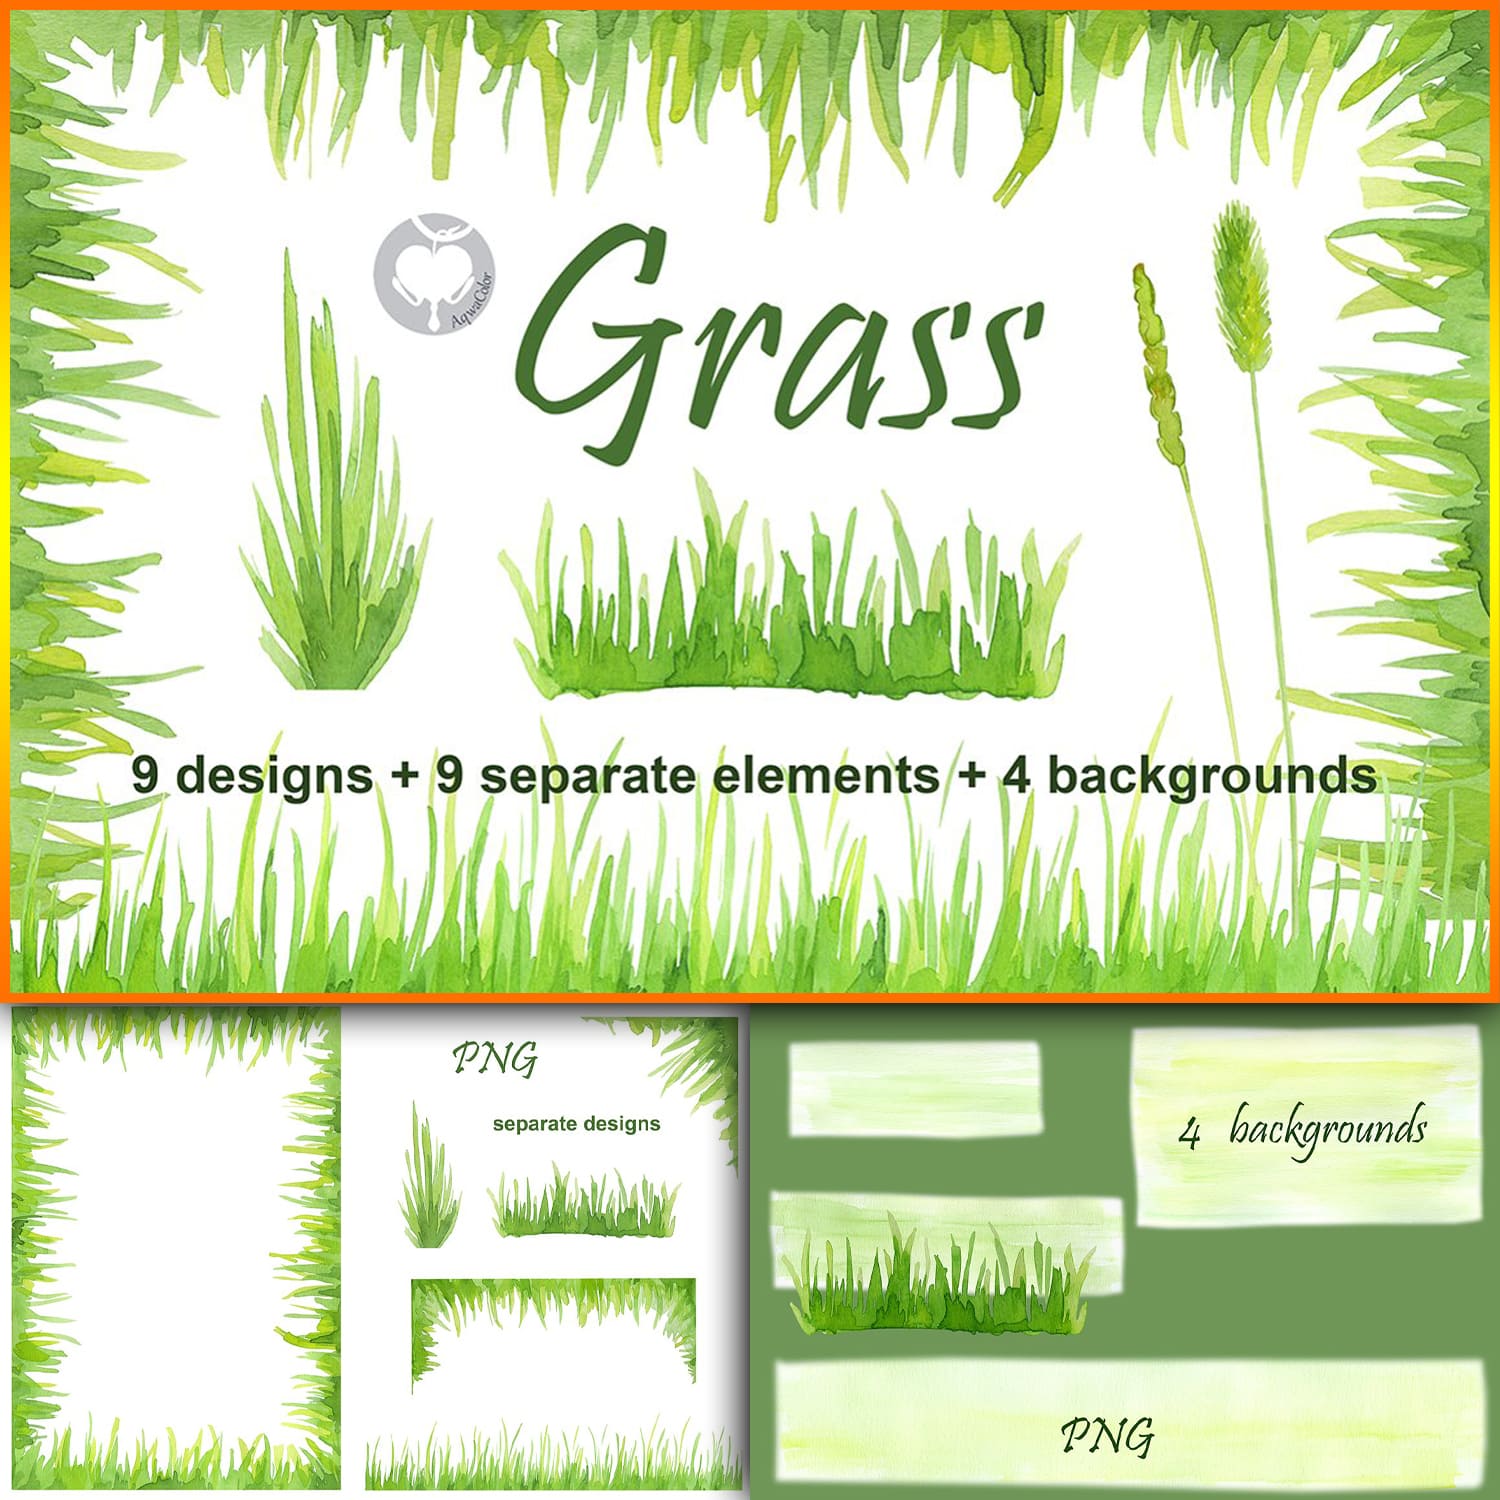 Watercolor handpainted clipart Grass cover.